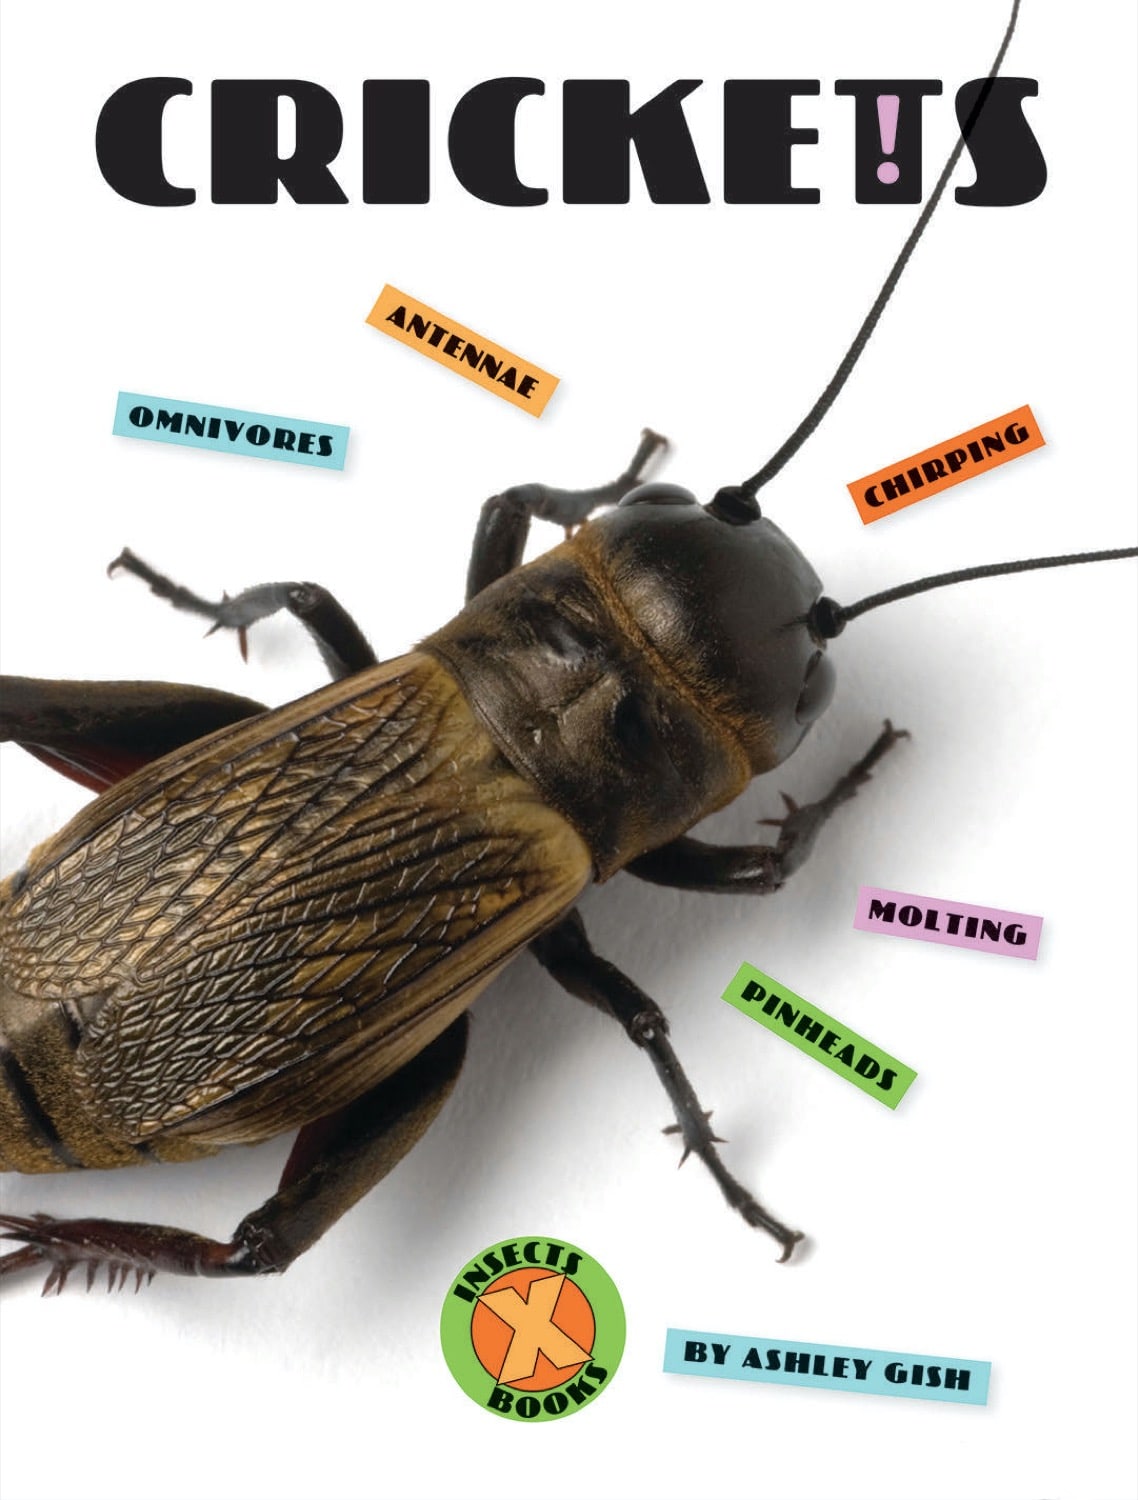 X-Books: Insects: Crickets